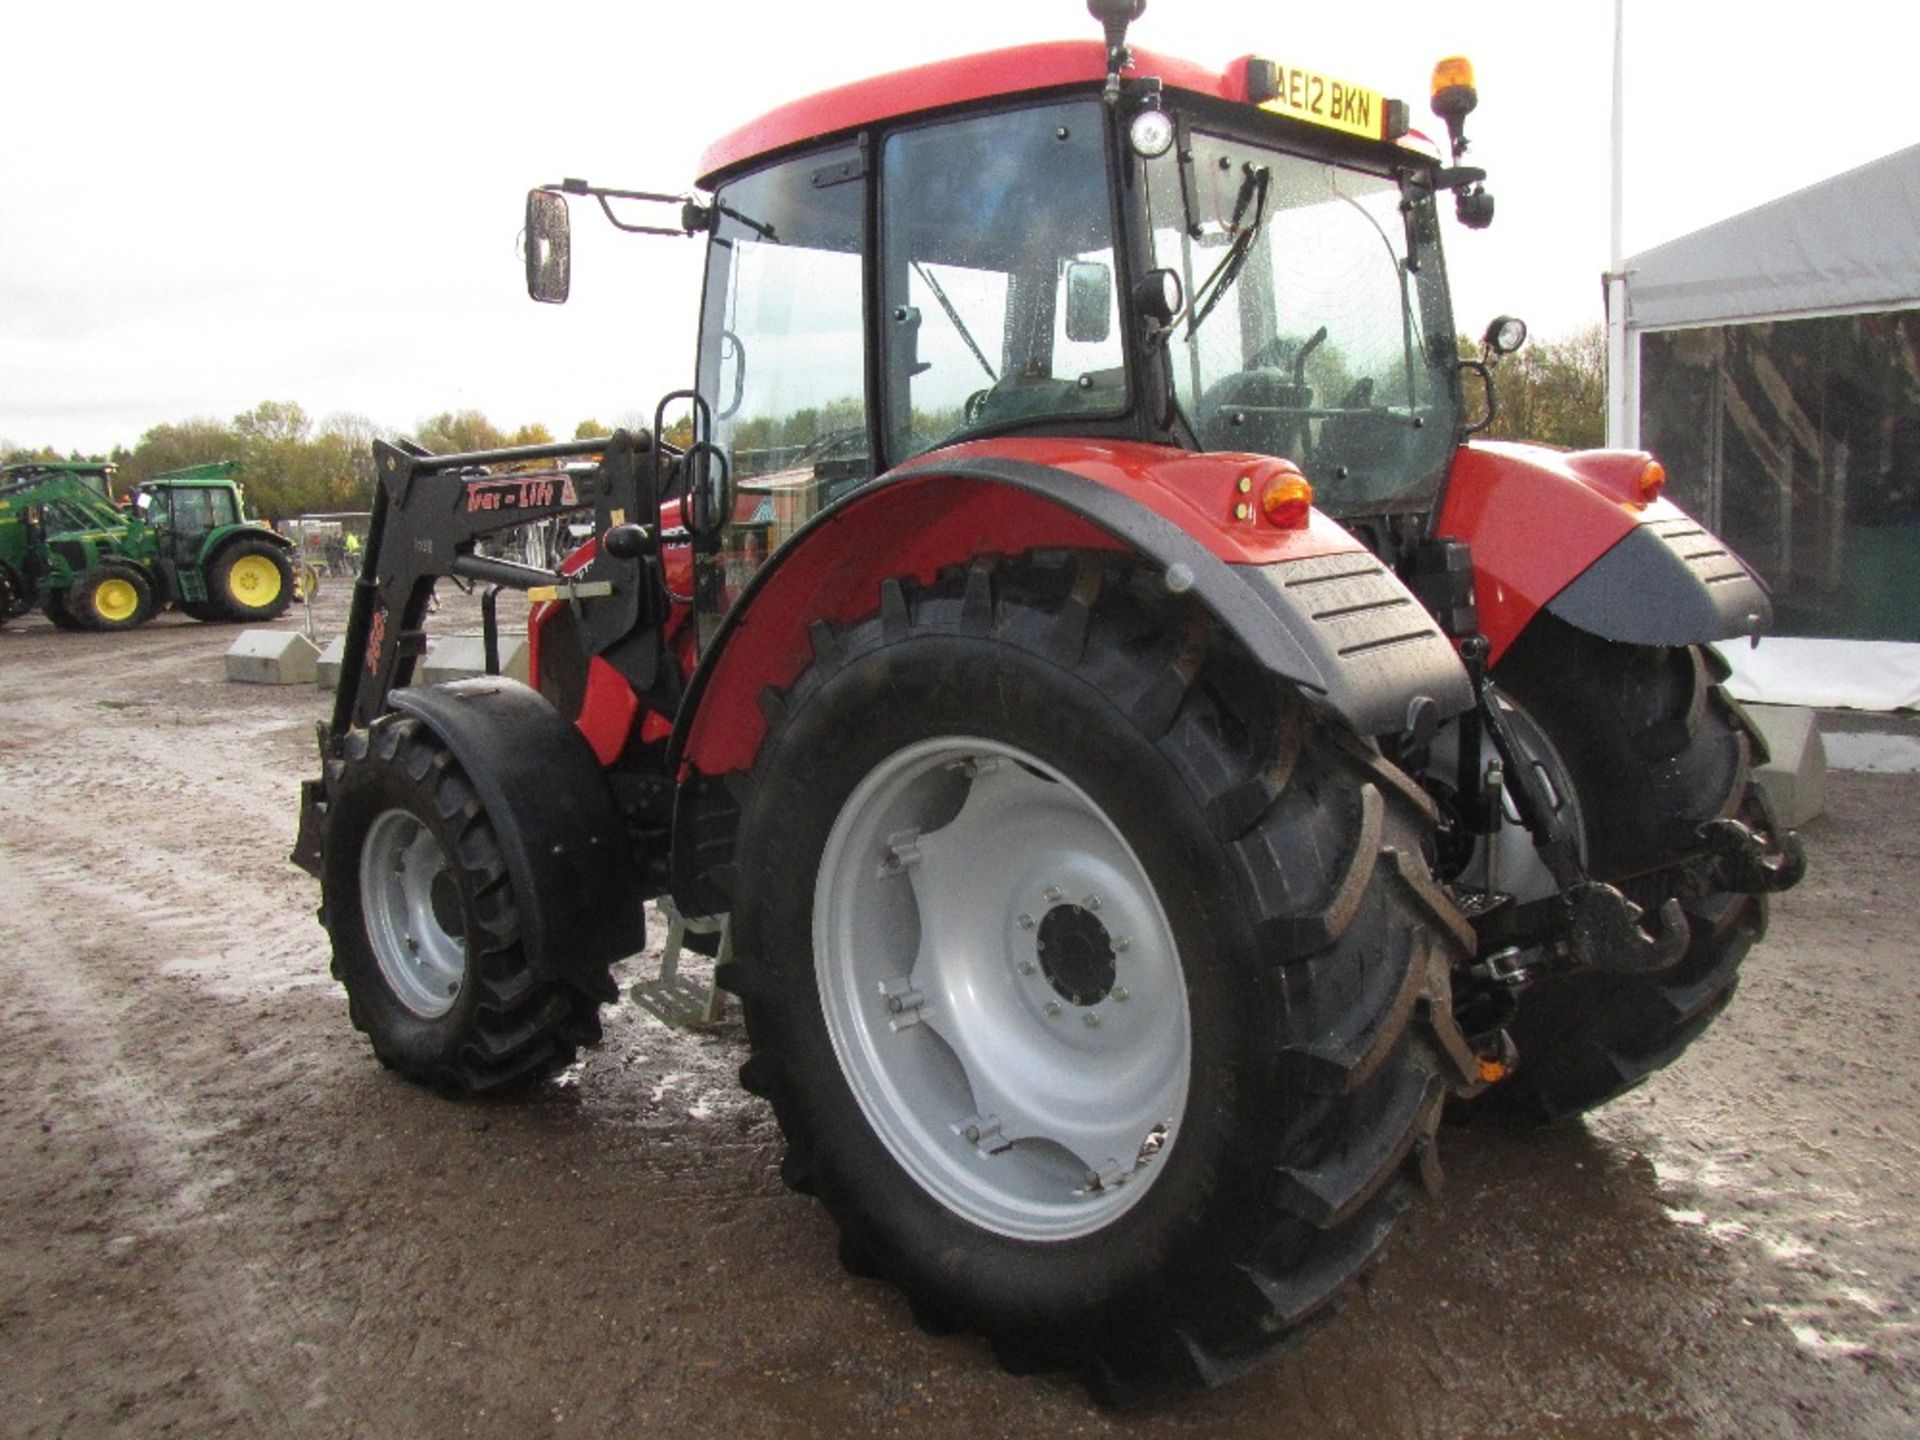 Zetor Forterra 125 4wd Tractor. 260 Trac Lift Loader. Reg Docs will be supplied. Reg. No. AE12 BKN. - Image 10 of 15